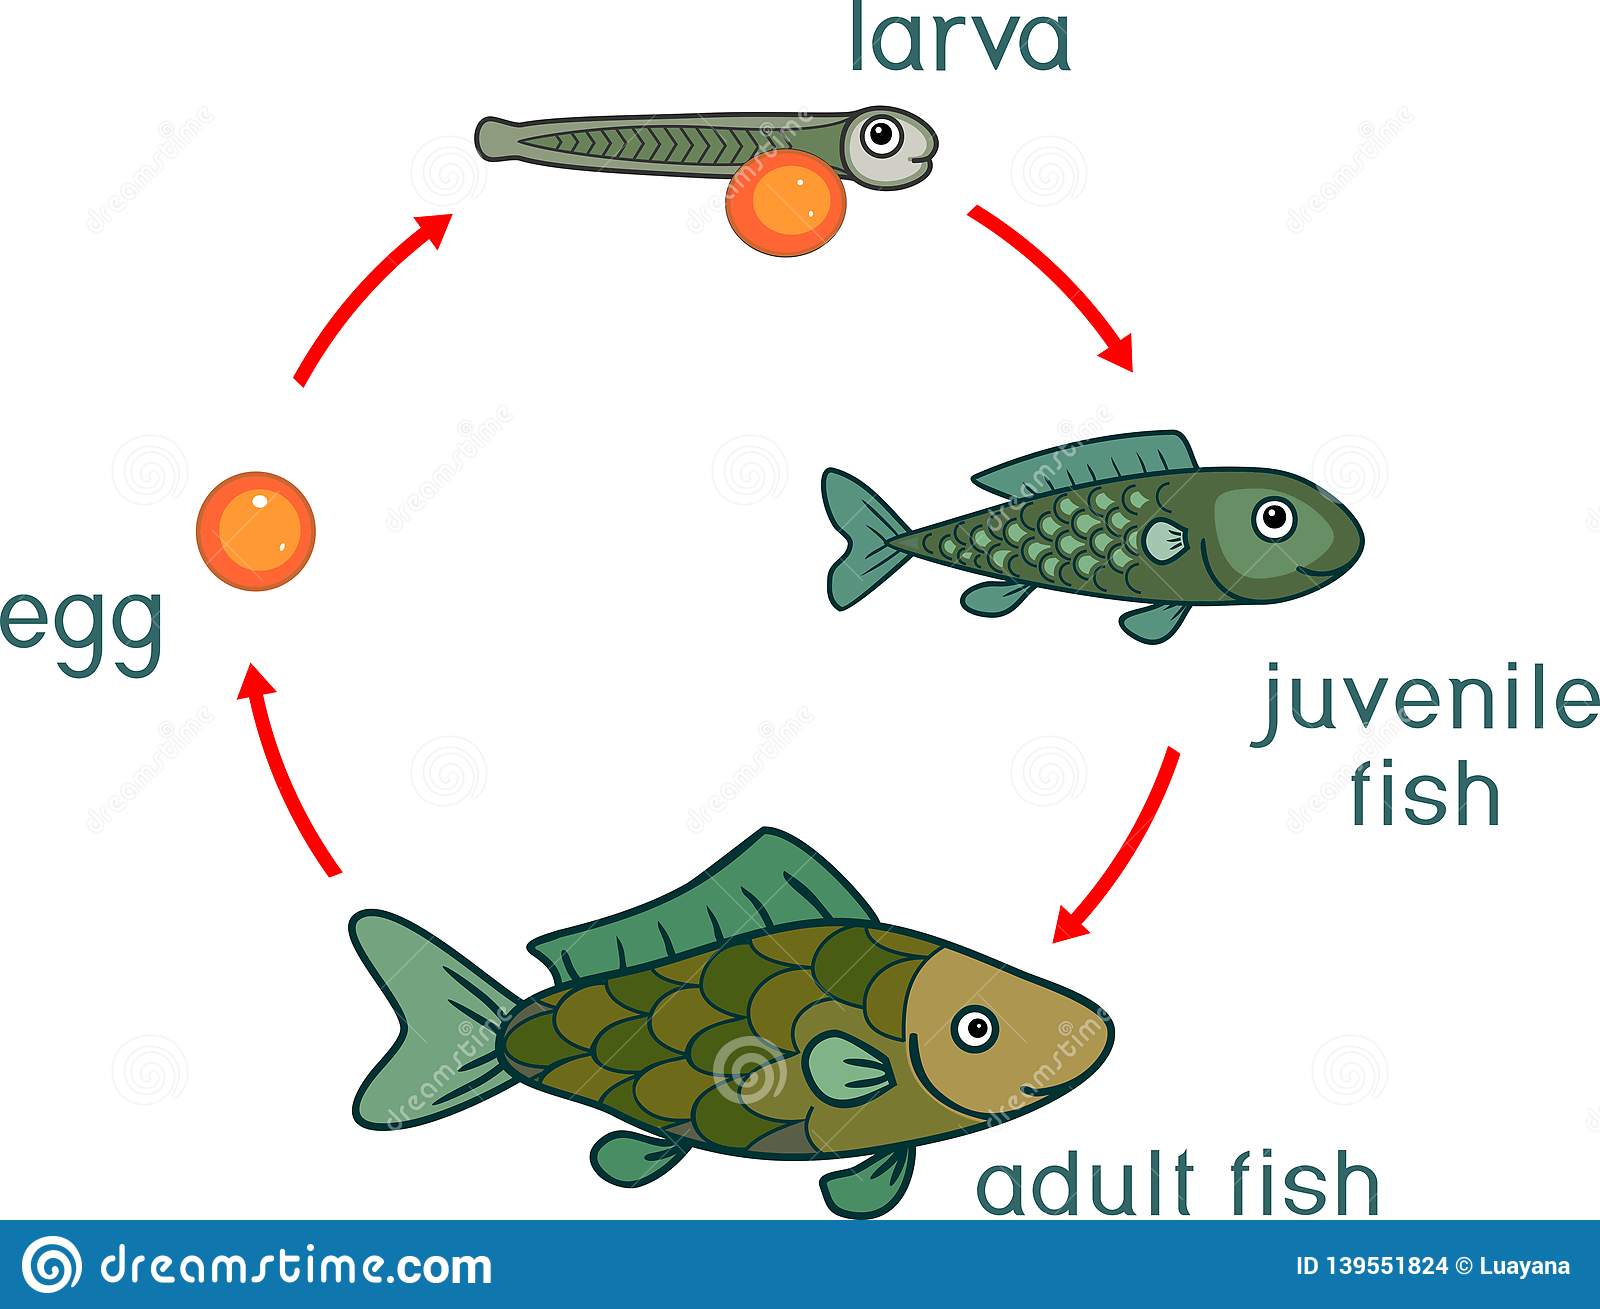 What is the life cycle of a fish?